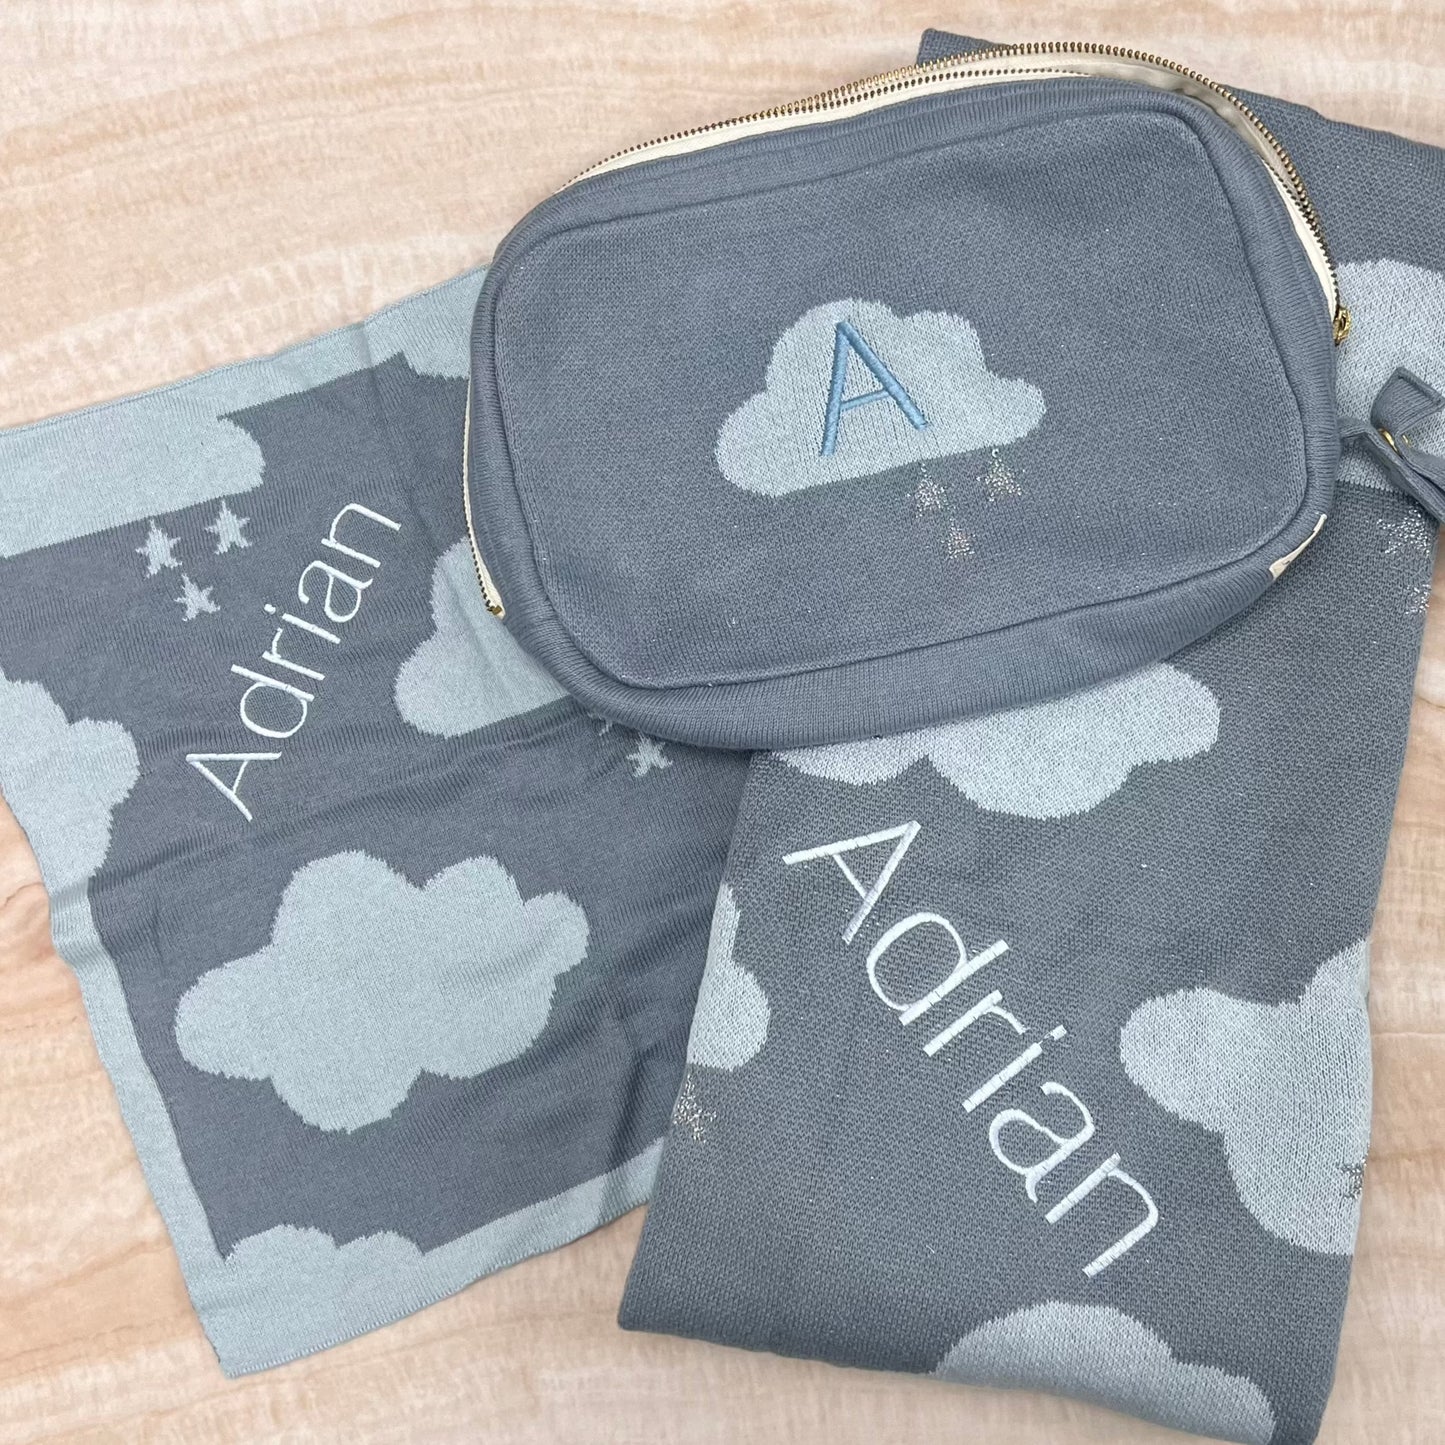 Personalized Baby Travel Set Blue Dreamy Clouds 3 Piece Knitted - Give Wink